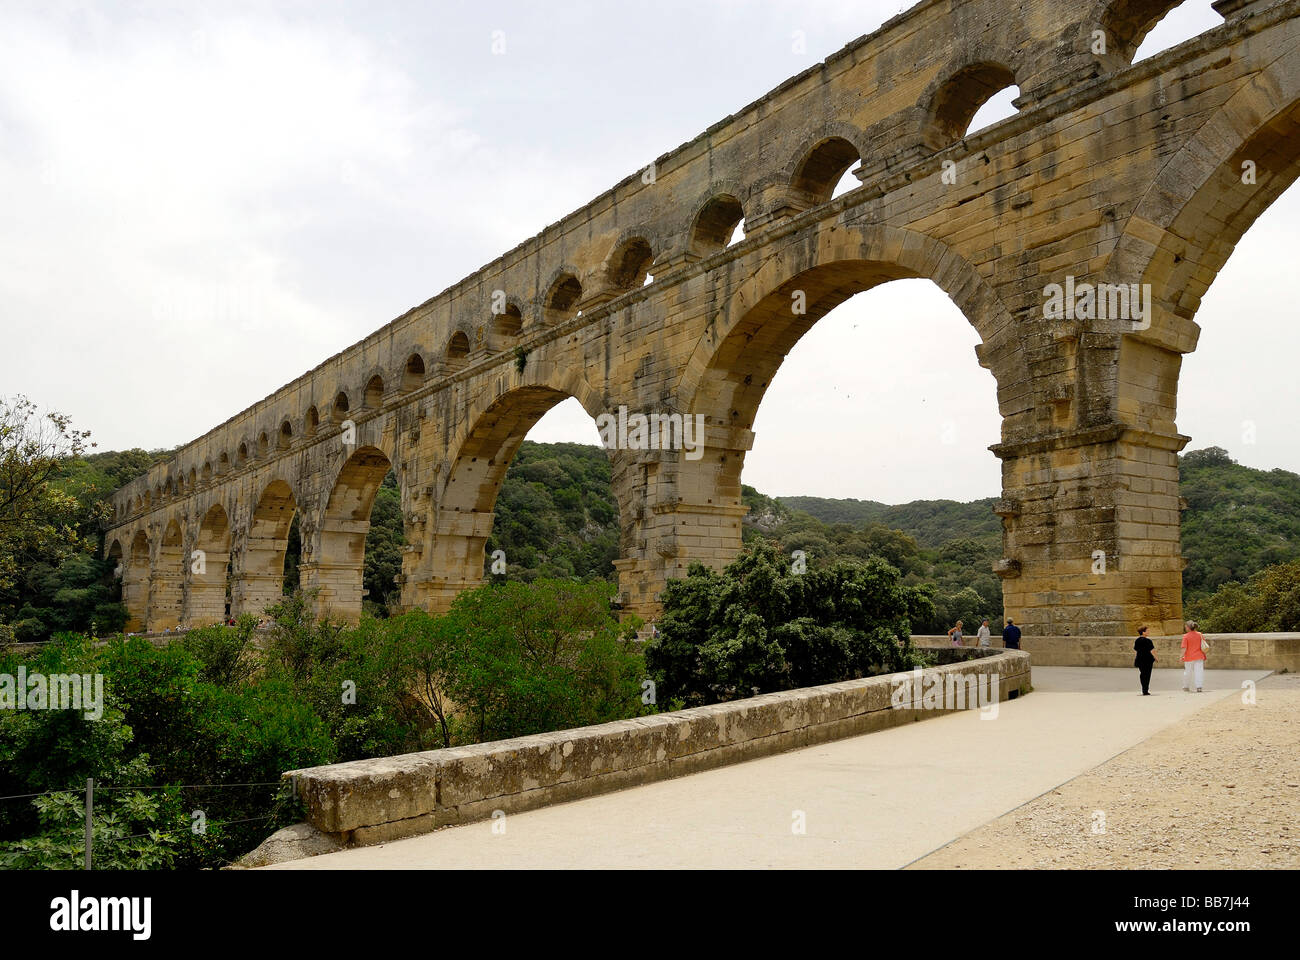 2000 year old Pont du Gard, built by the Romans, aqueduct, near Nimes, Languedoc-Roussillon, France, Europe Stock Photo